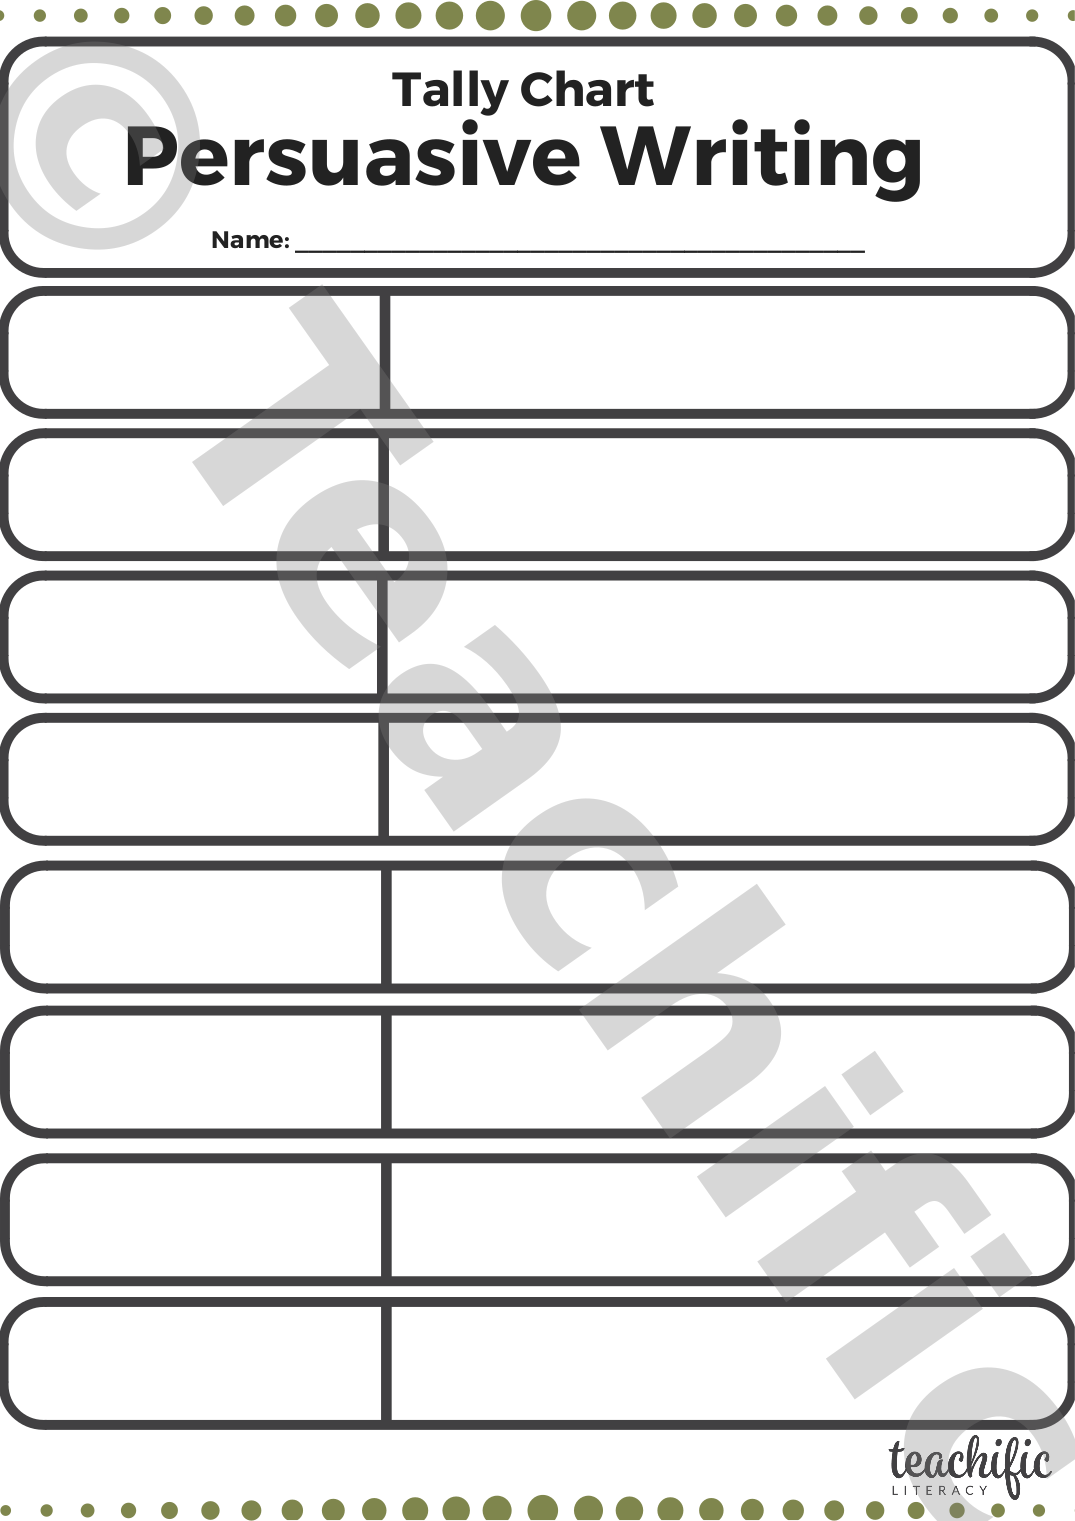 Create Your Own Tally Chart